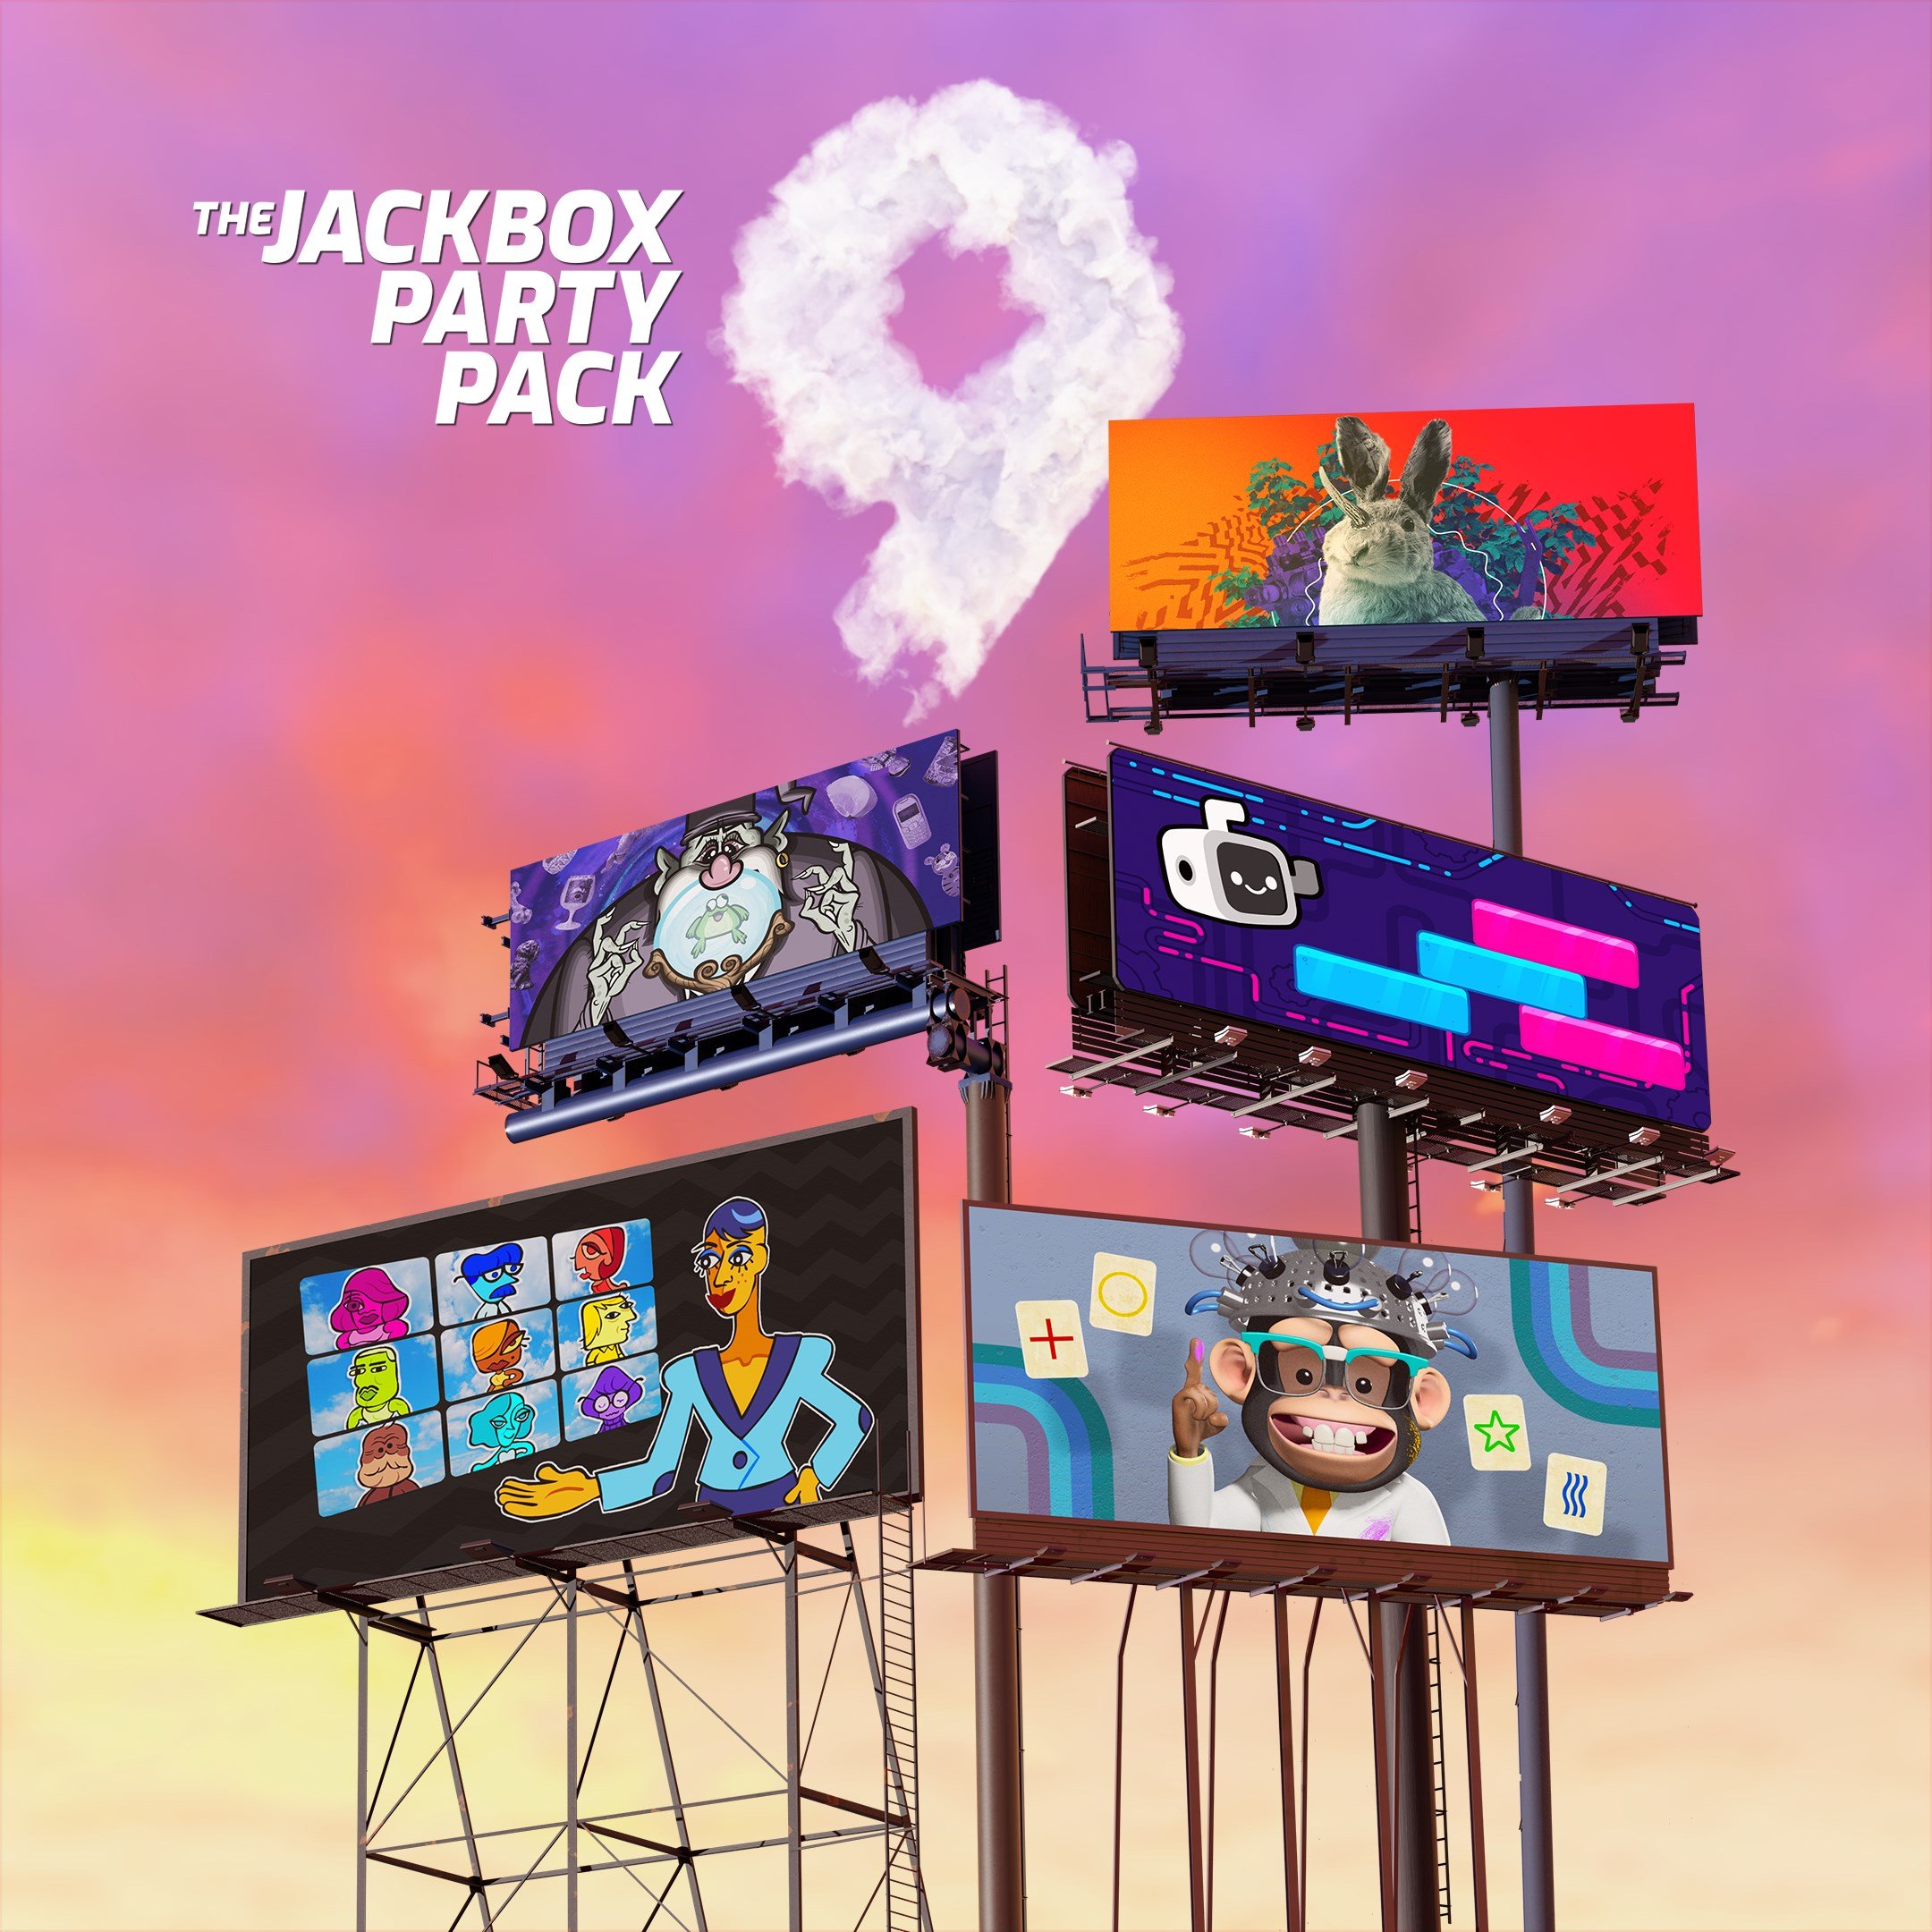 Boxart for The Jackbox Party Pack 9